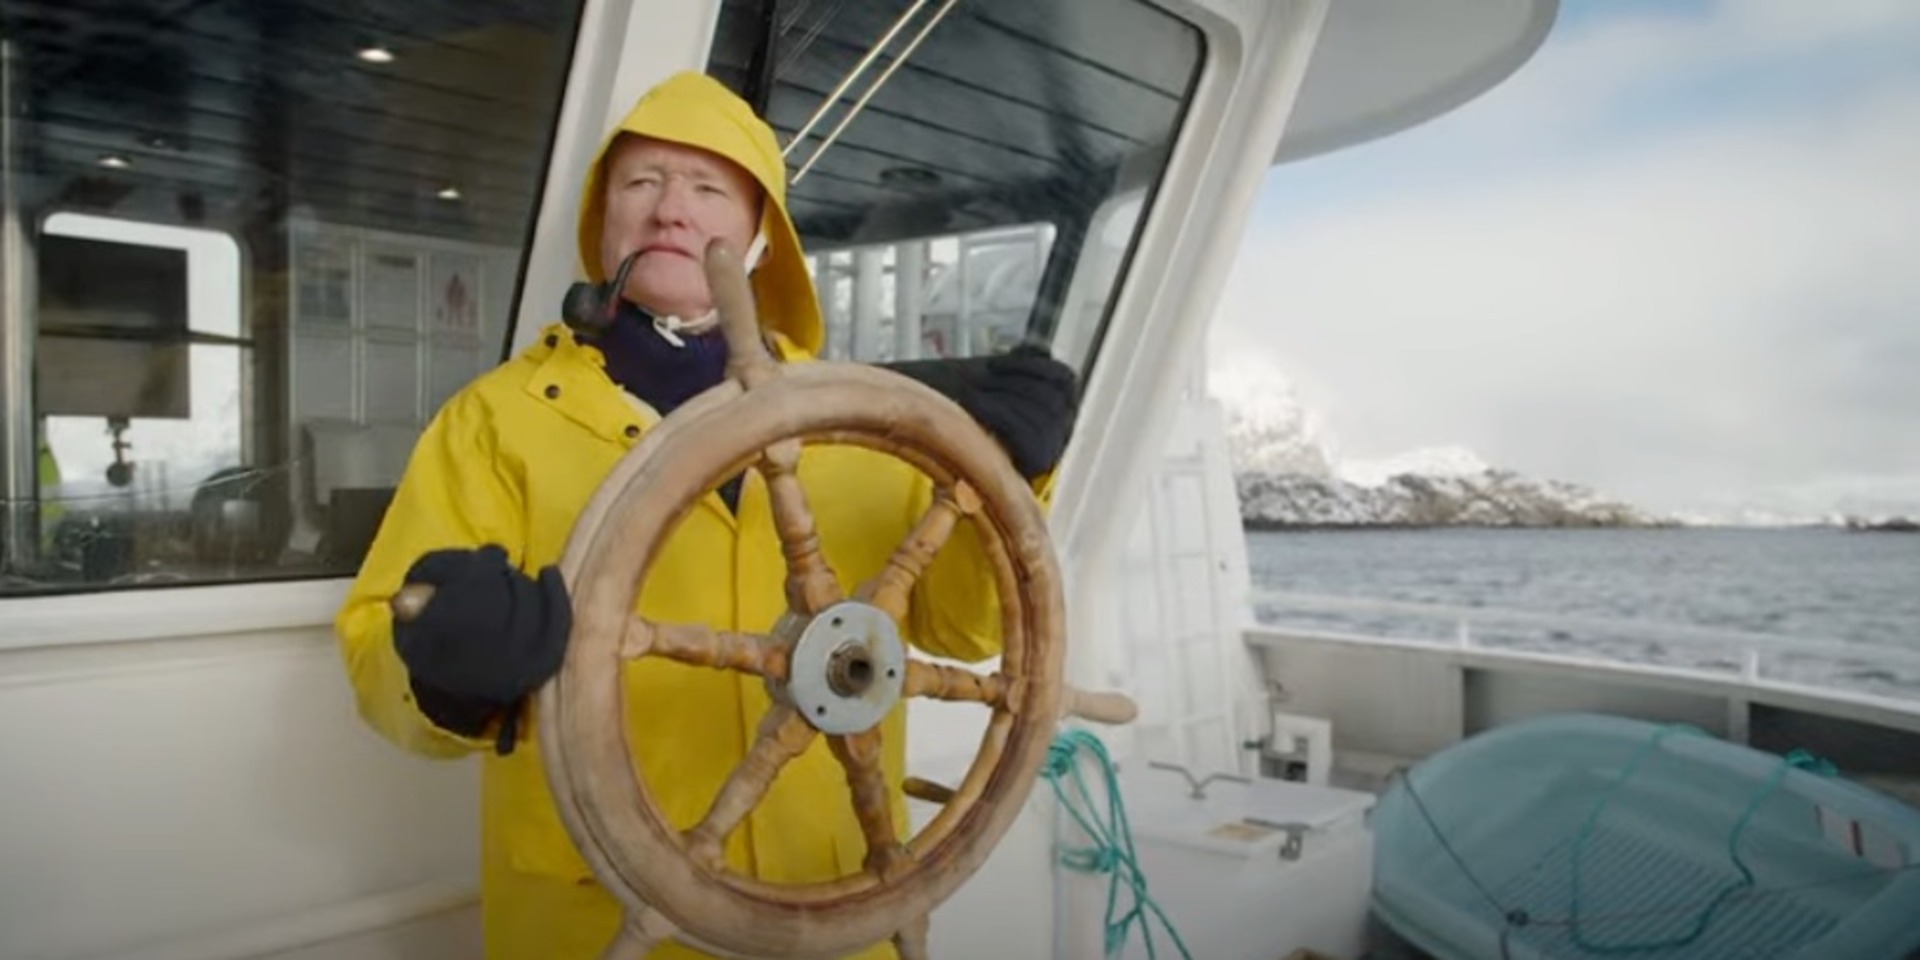 Conan O’Brien is dressed in a yellow raincoat as he steers a boat in this image from Conaco.